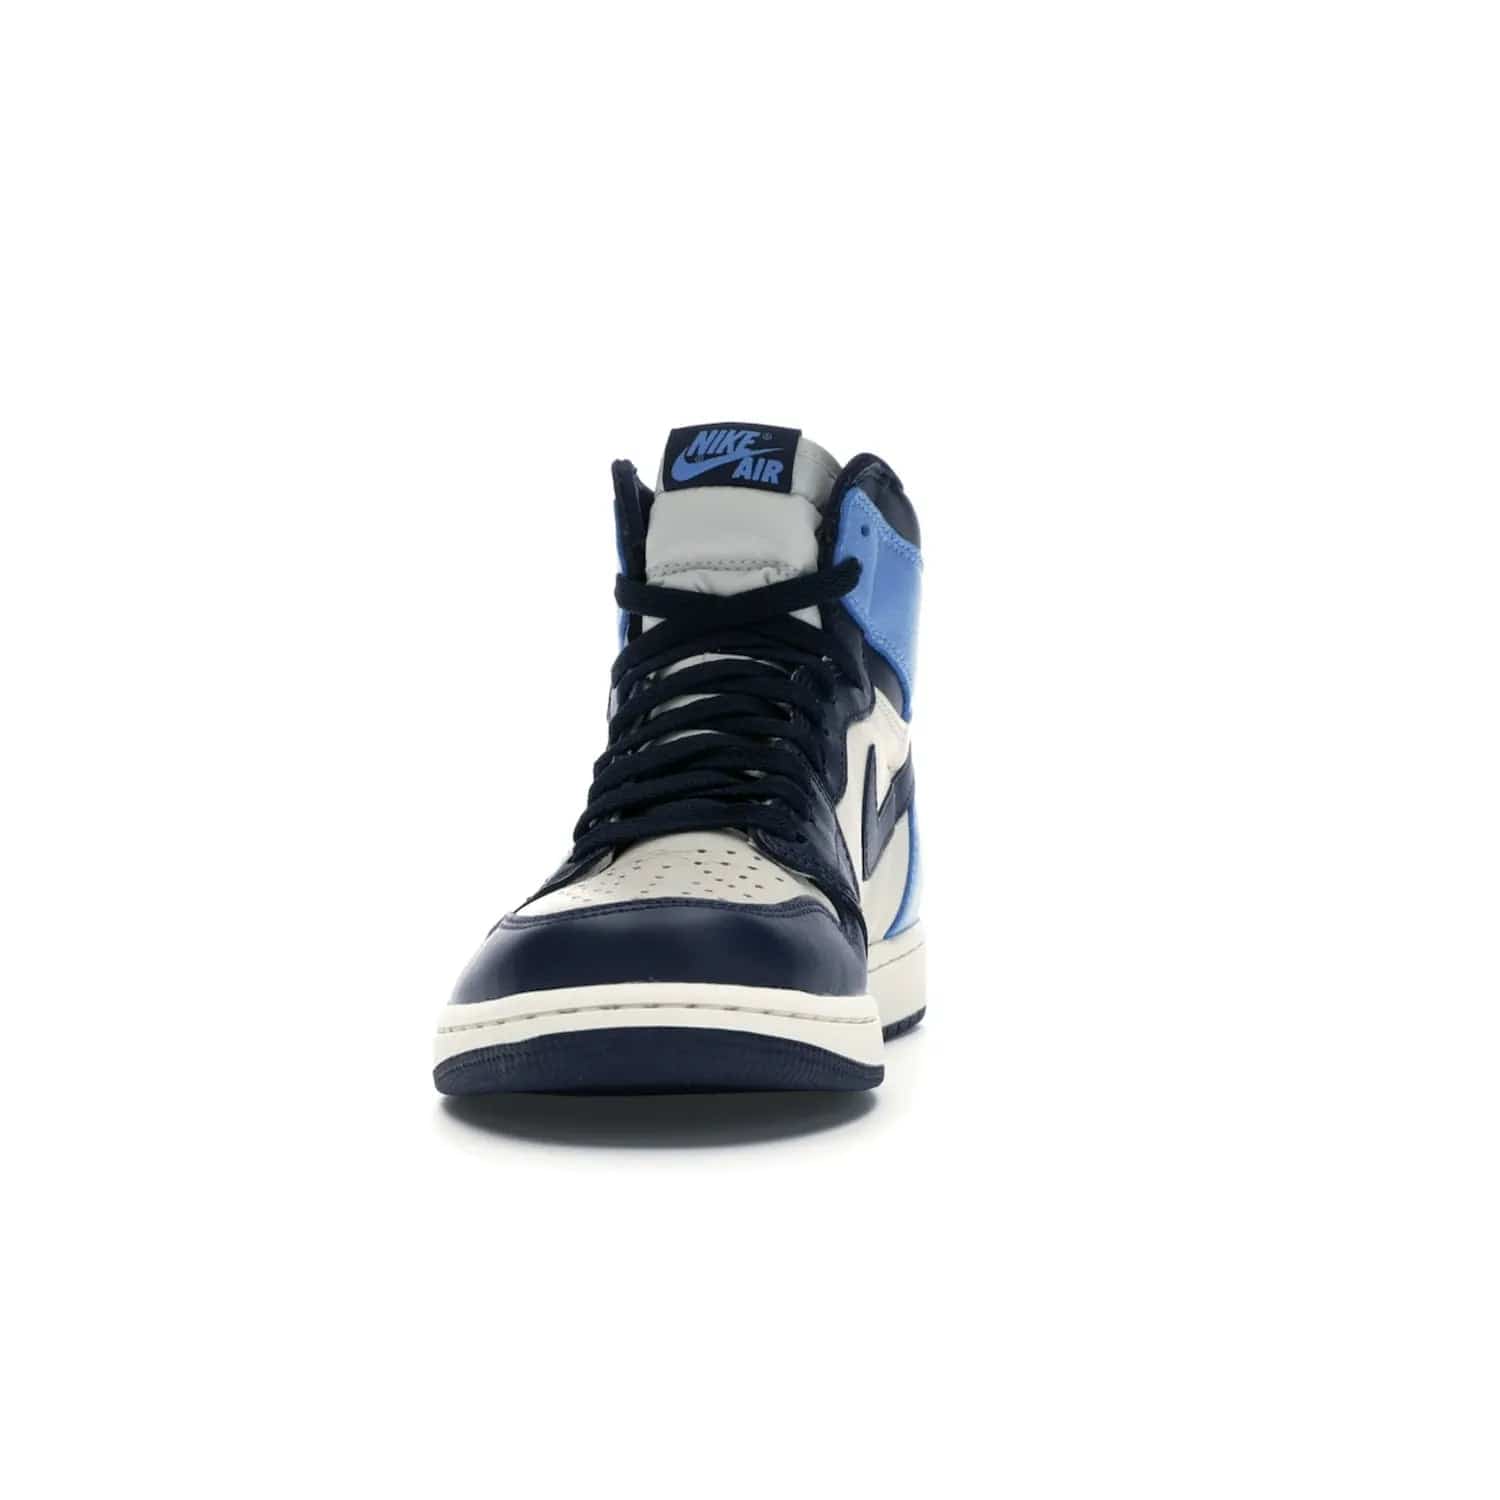 Jordan 1 Retro High Obsidian UNC - Image 11 - Only at www.BallersClubKickz.com - Bring a timeless classic to your wardrobe with the Air Jordan 1 Retro High "Obsidian/University Blue”. A full leather upper combines Obsidian and University Blue detailing for a retro Jordan style. Stitched Jumpman logo pays tribute to UNC. Experience classic style with a timeless sneaker.